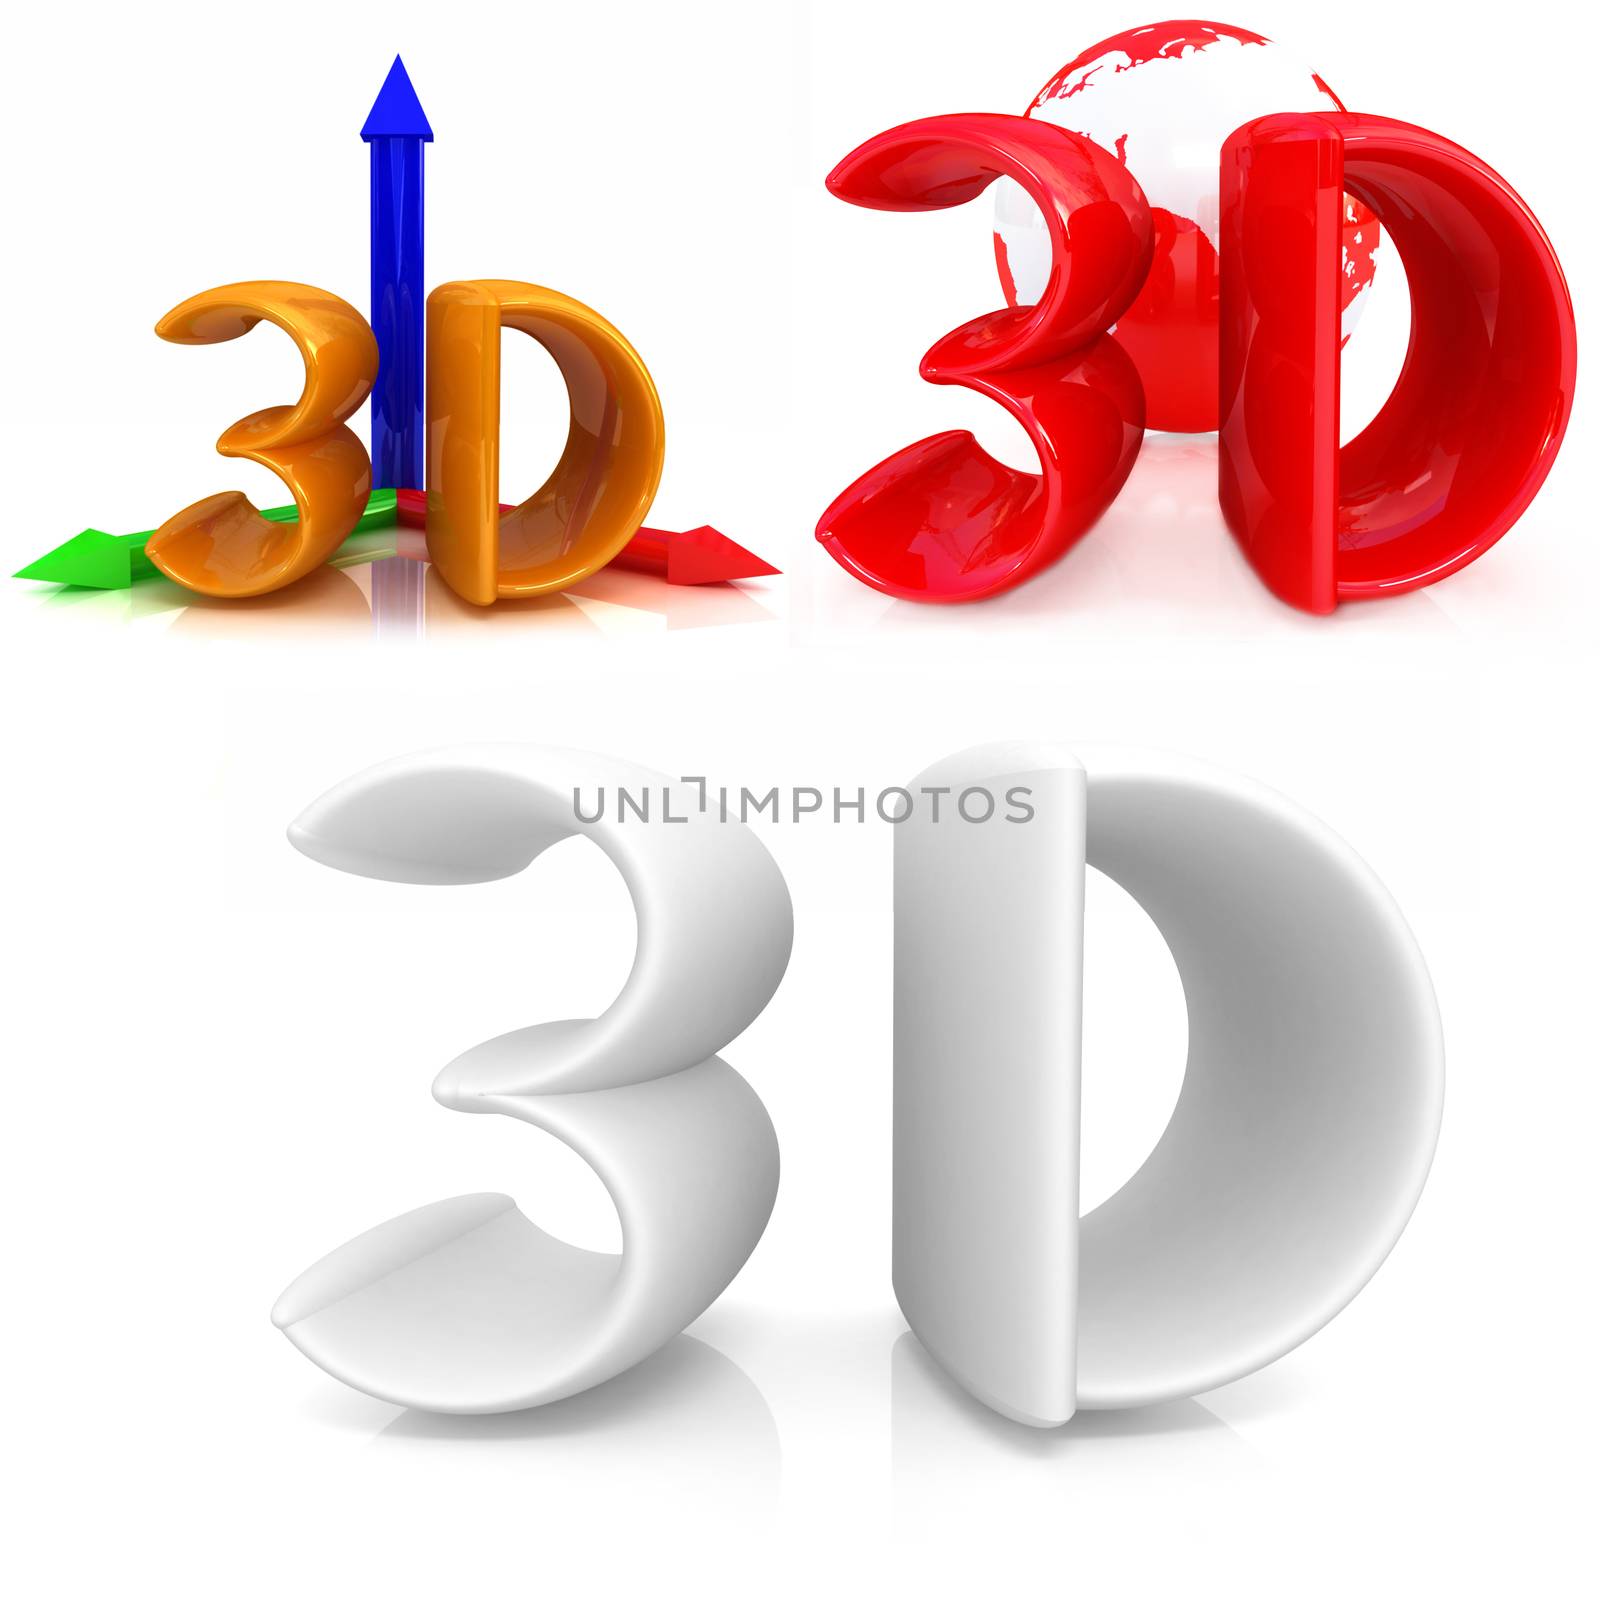 3d text on a white background